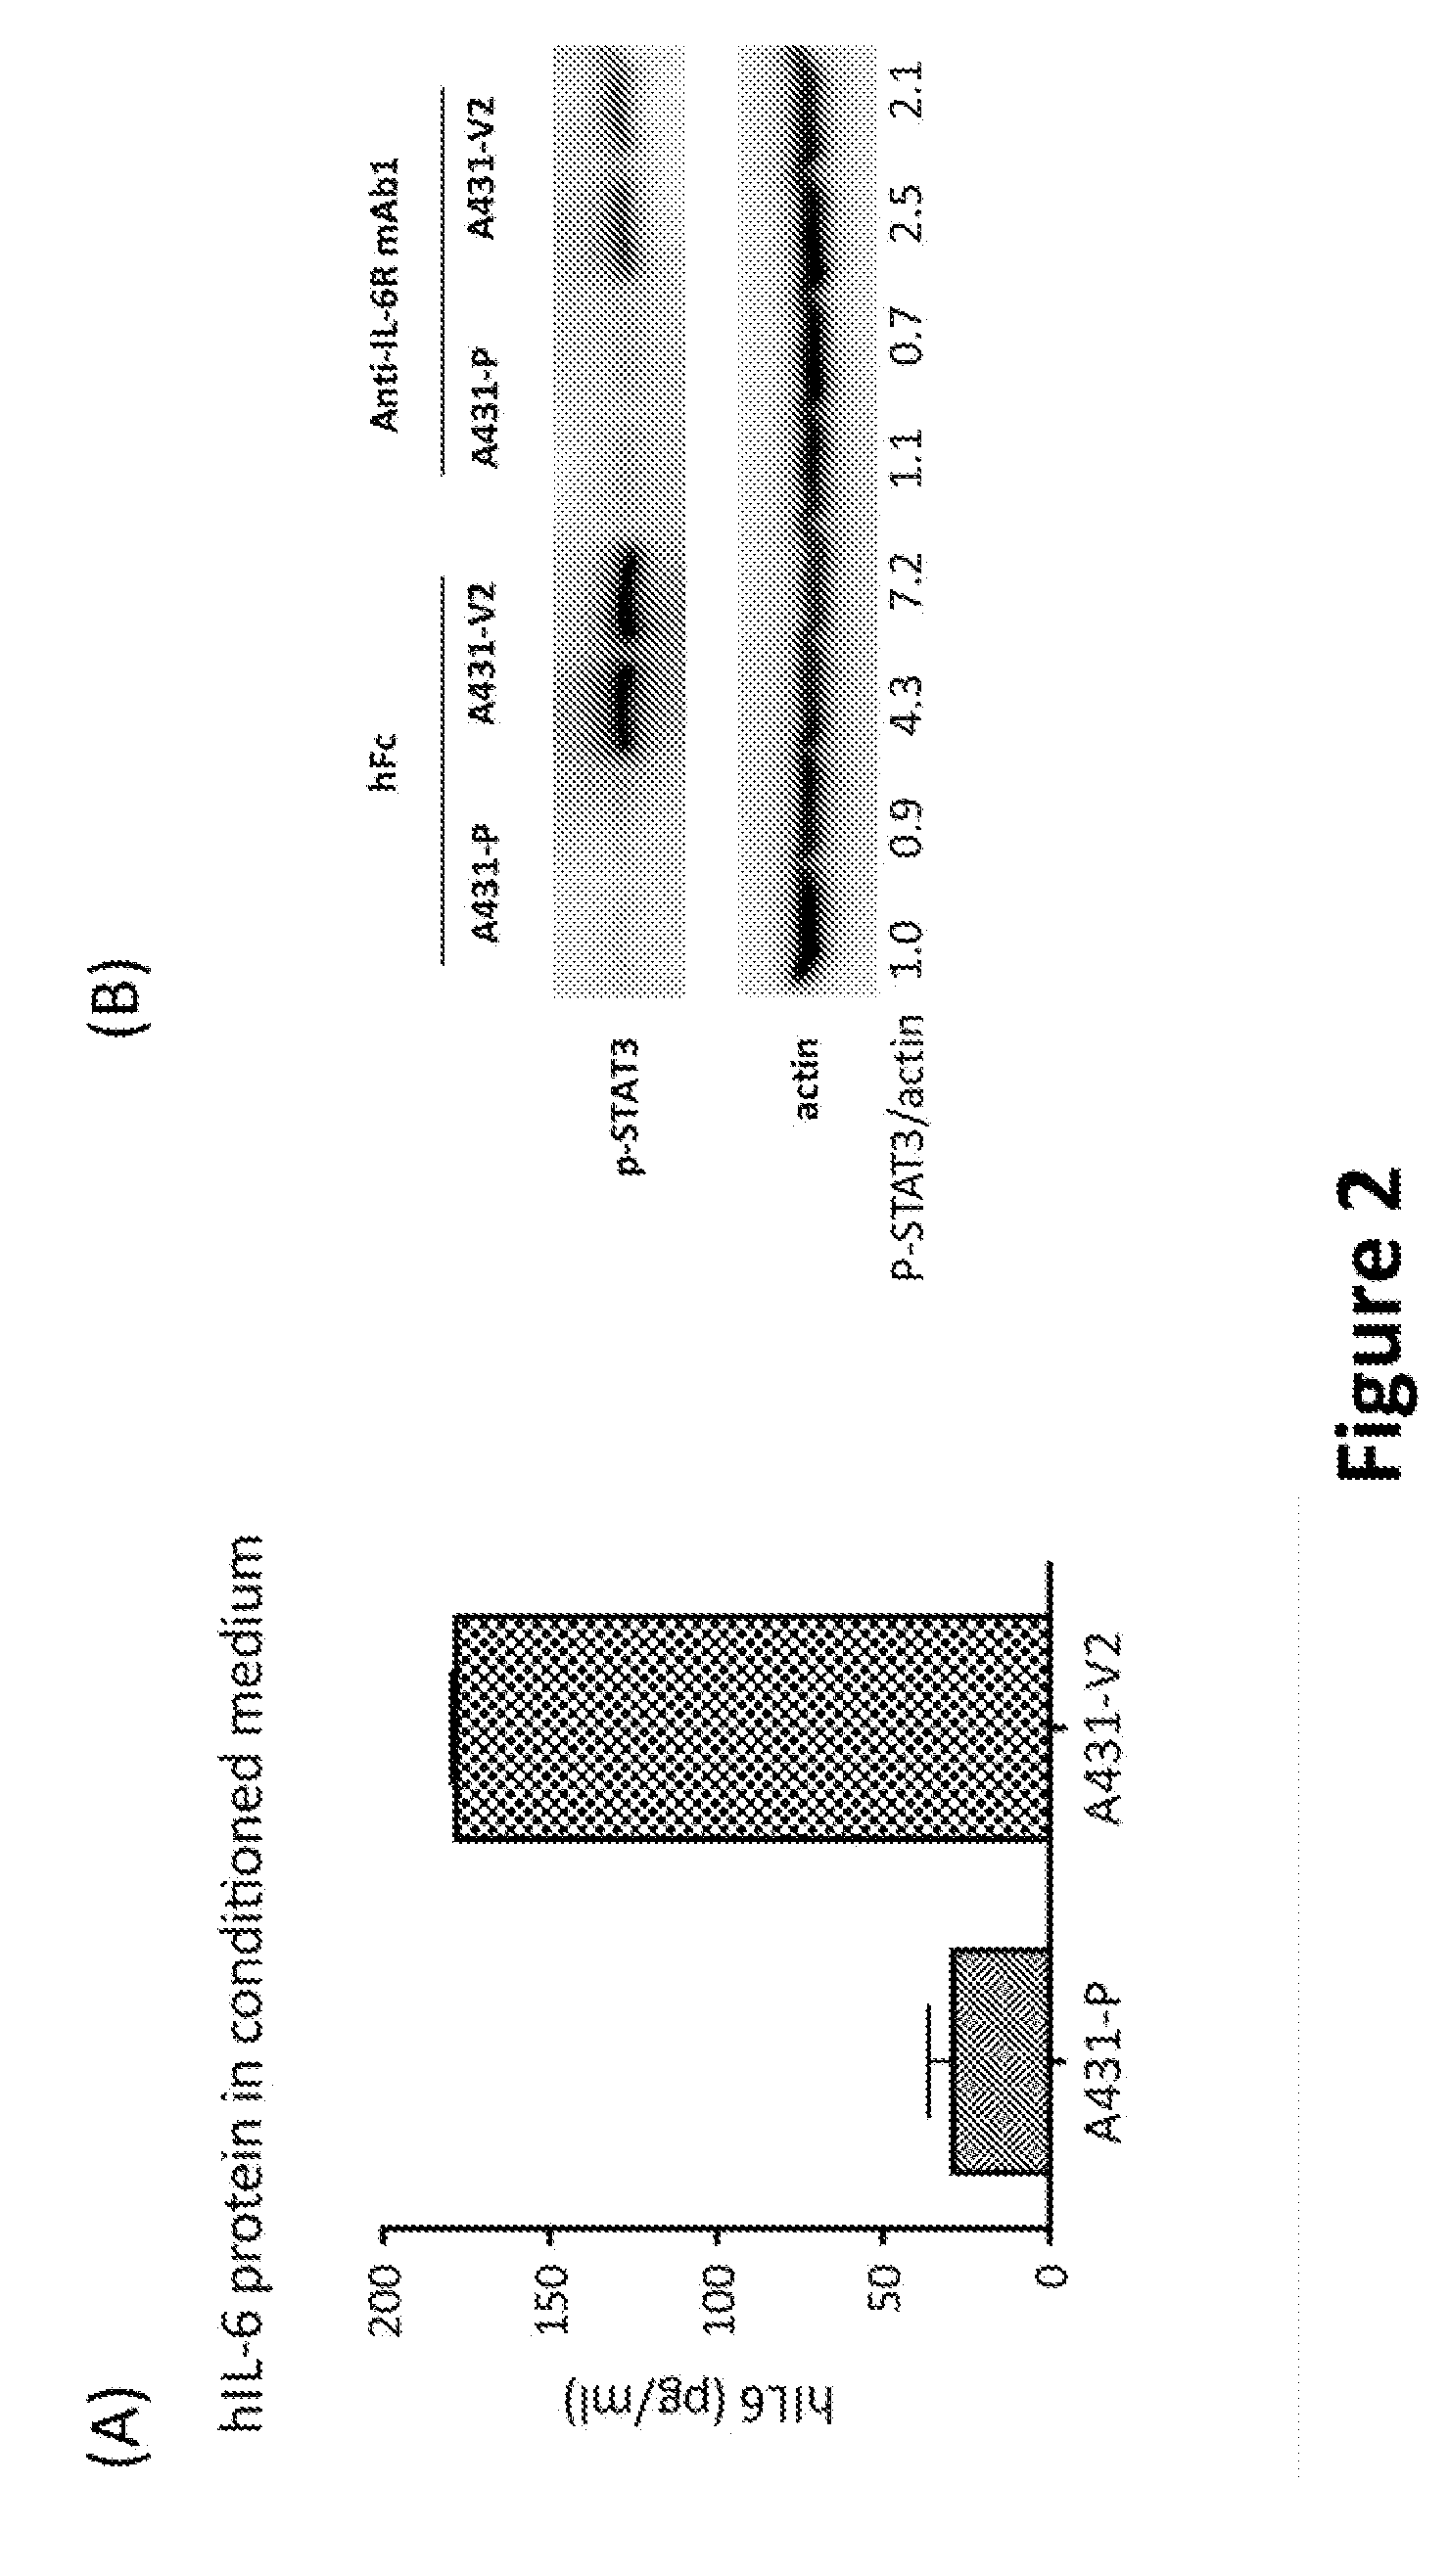 Methods of inhibiting tumor growth by antagonizing il-6 receptor